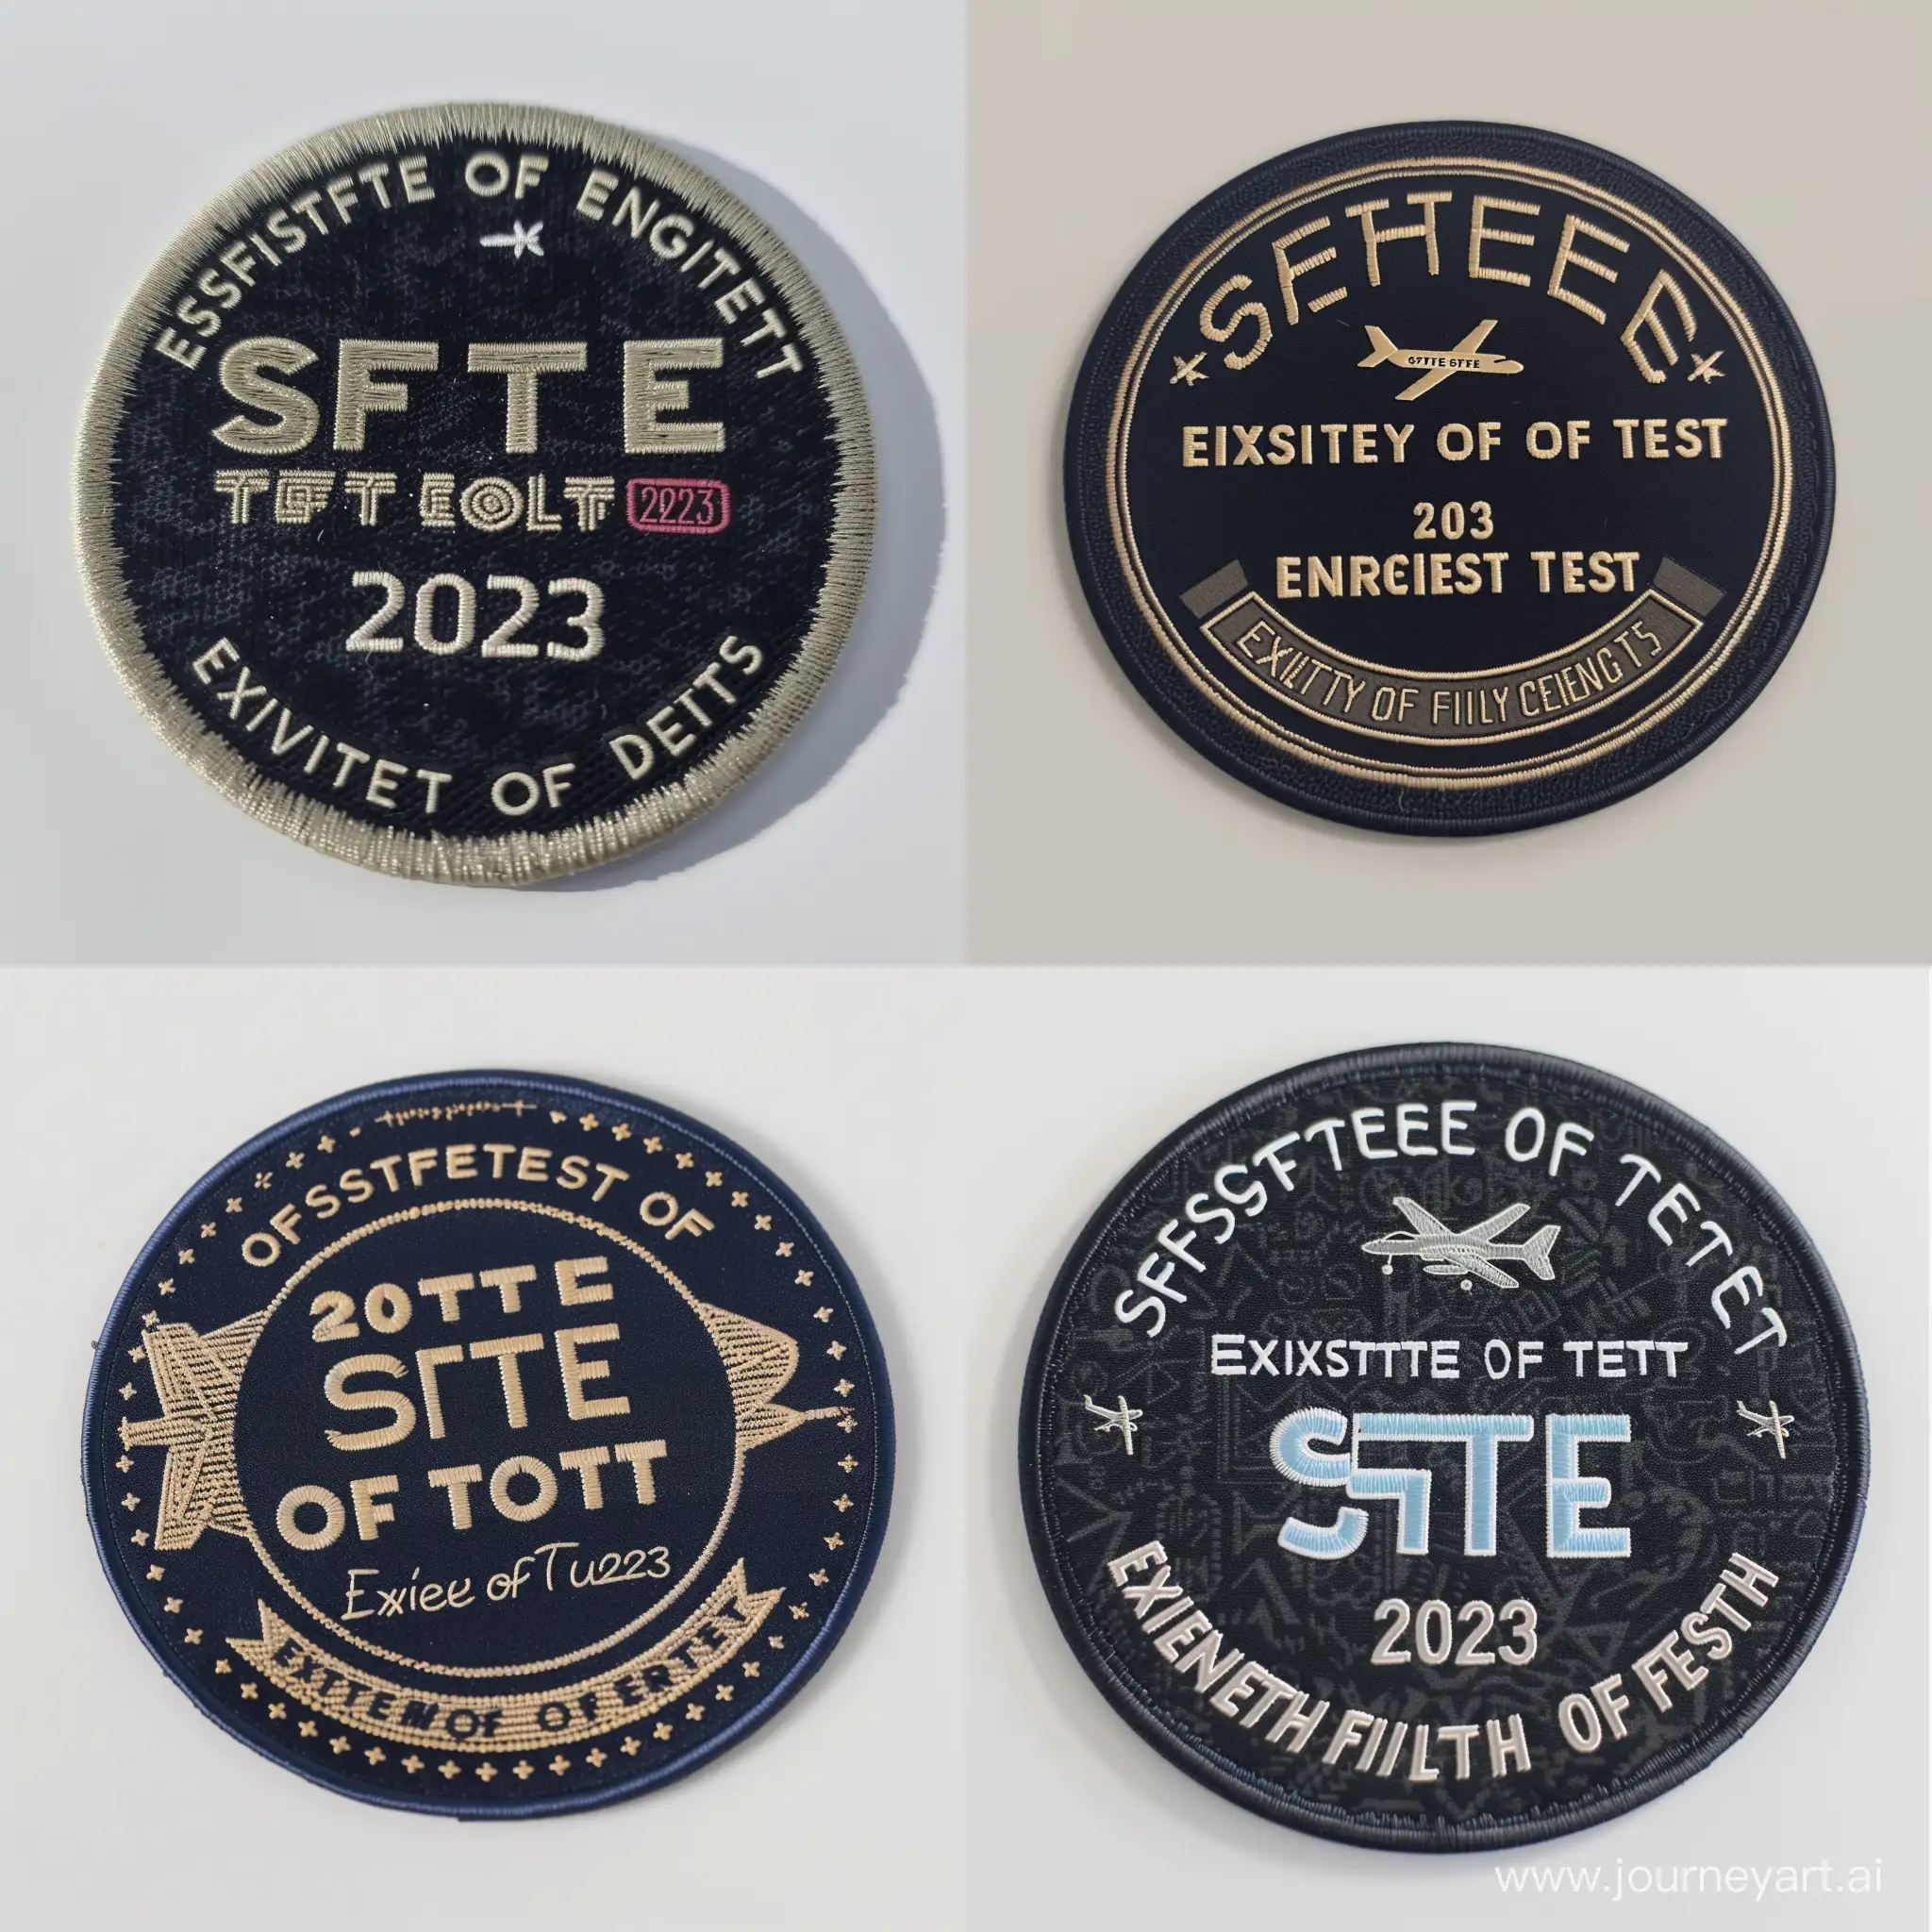 User
Create a circular patch for the society of flight test engineers. It must include the SFTE logo. It must include the year 2023 and the words: "excitement of flight test". Include references to aircraft and mathematics, engineering 